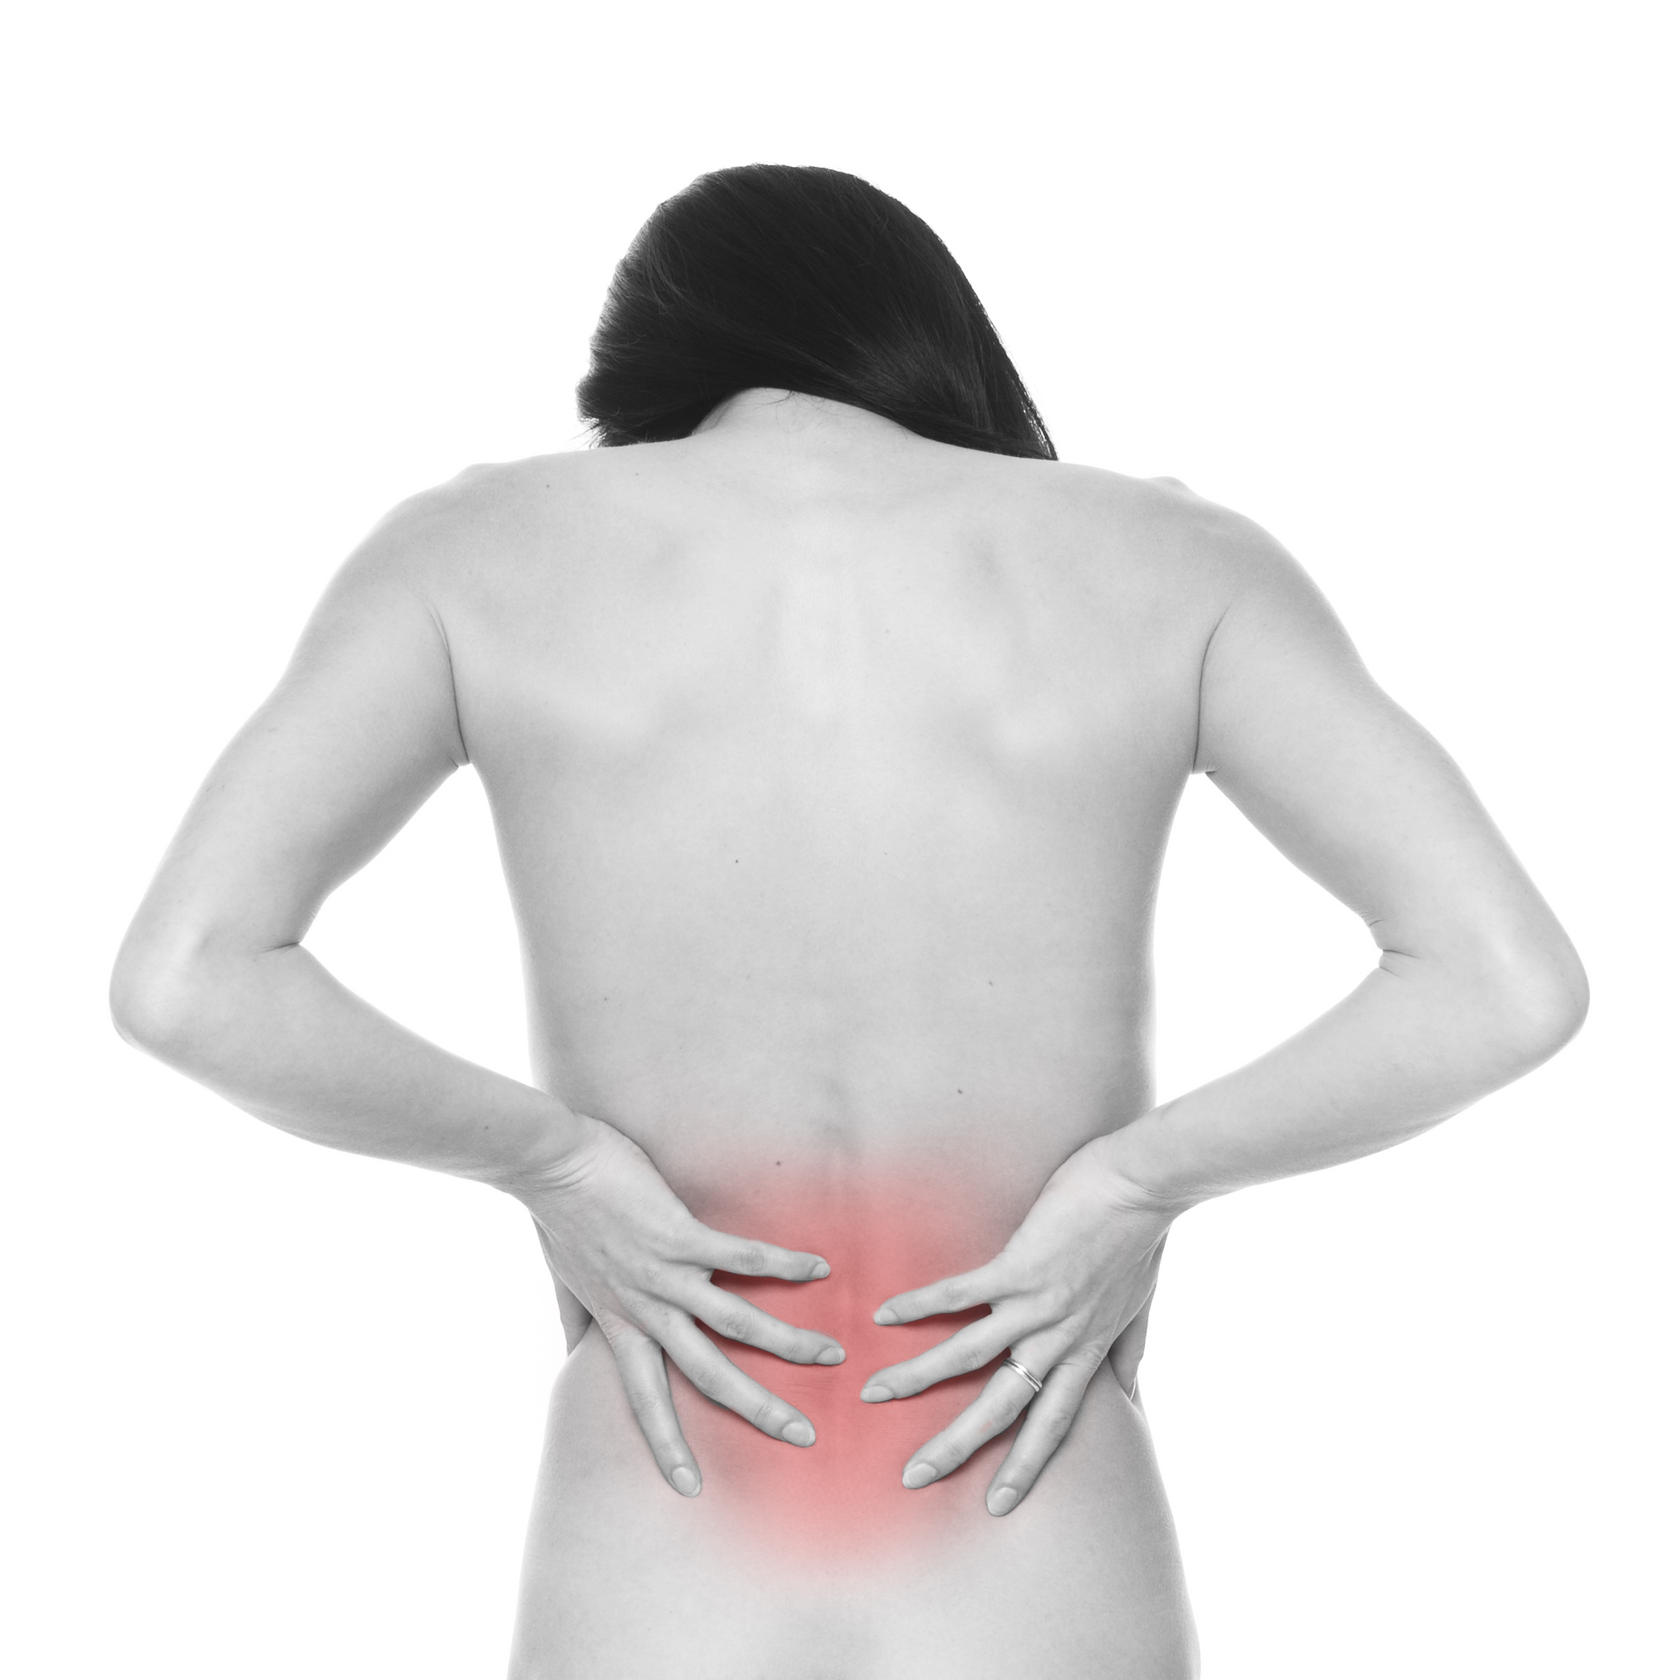 Specific lower back pain